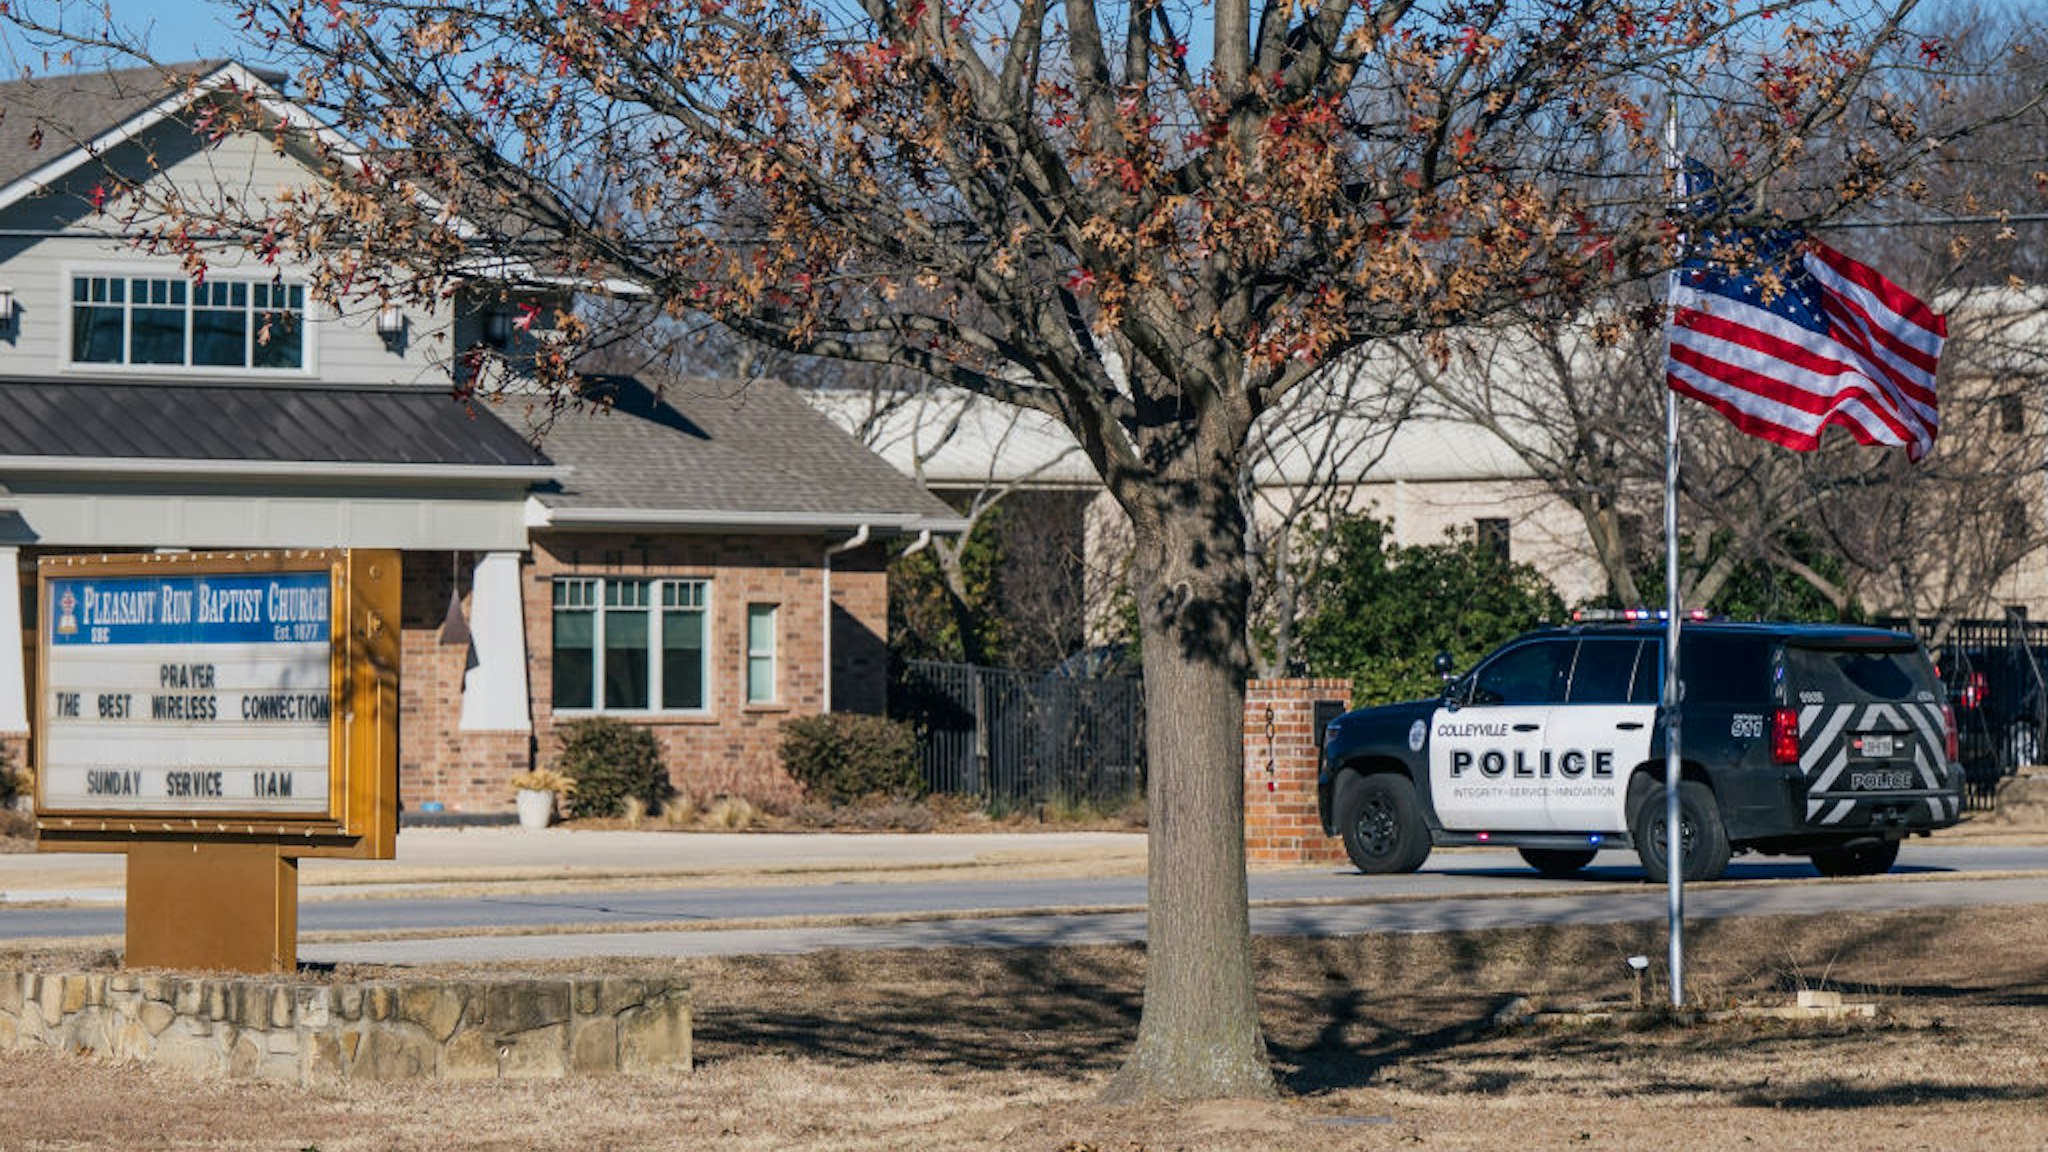 A law enforcement vehicle sits near the Congregation Beth Israel synagogue on January 16, 2022 in Colleyville, Texas.